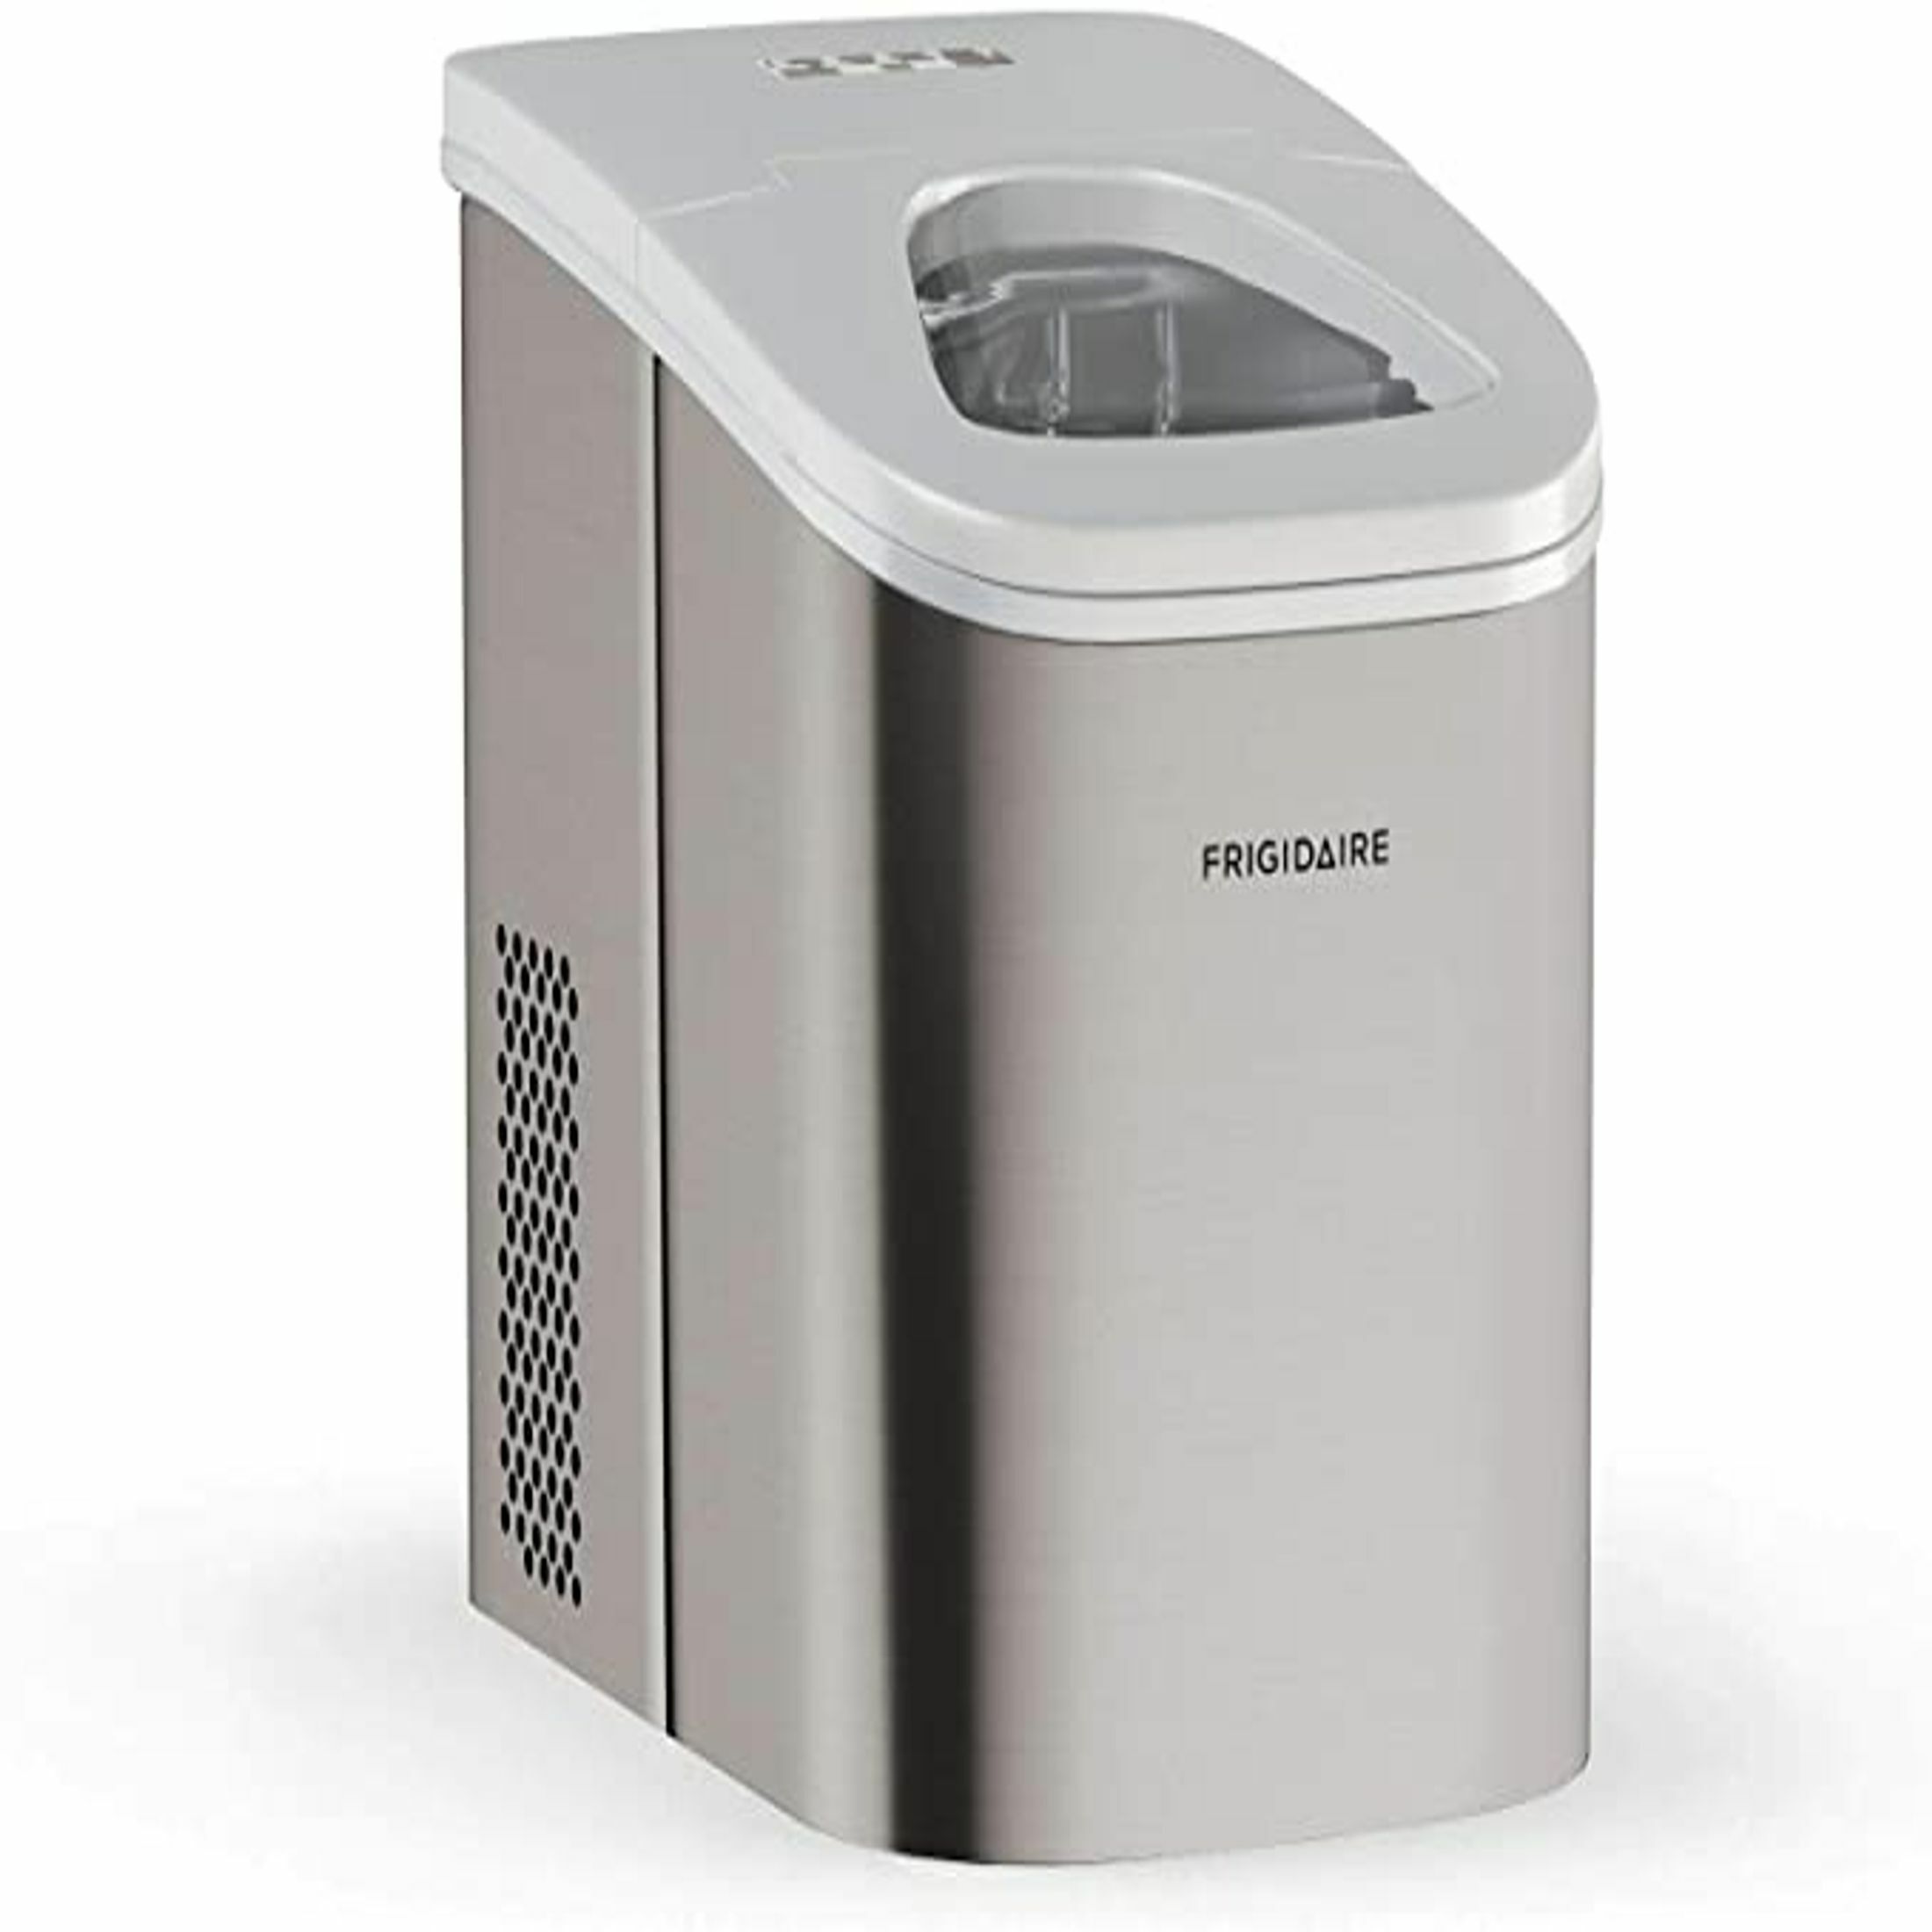 FRIGIDAIRE 2.3 Qt. Stainless-Steel Counter Top Ice Maker - Stainless-Steel - image 2 of 4